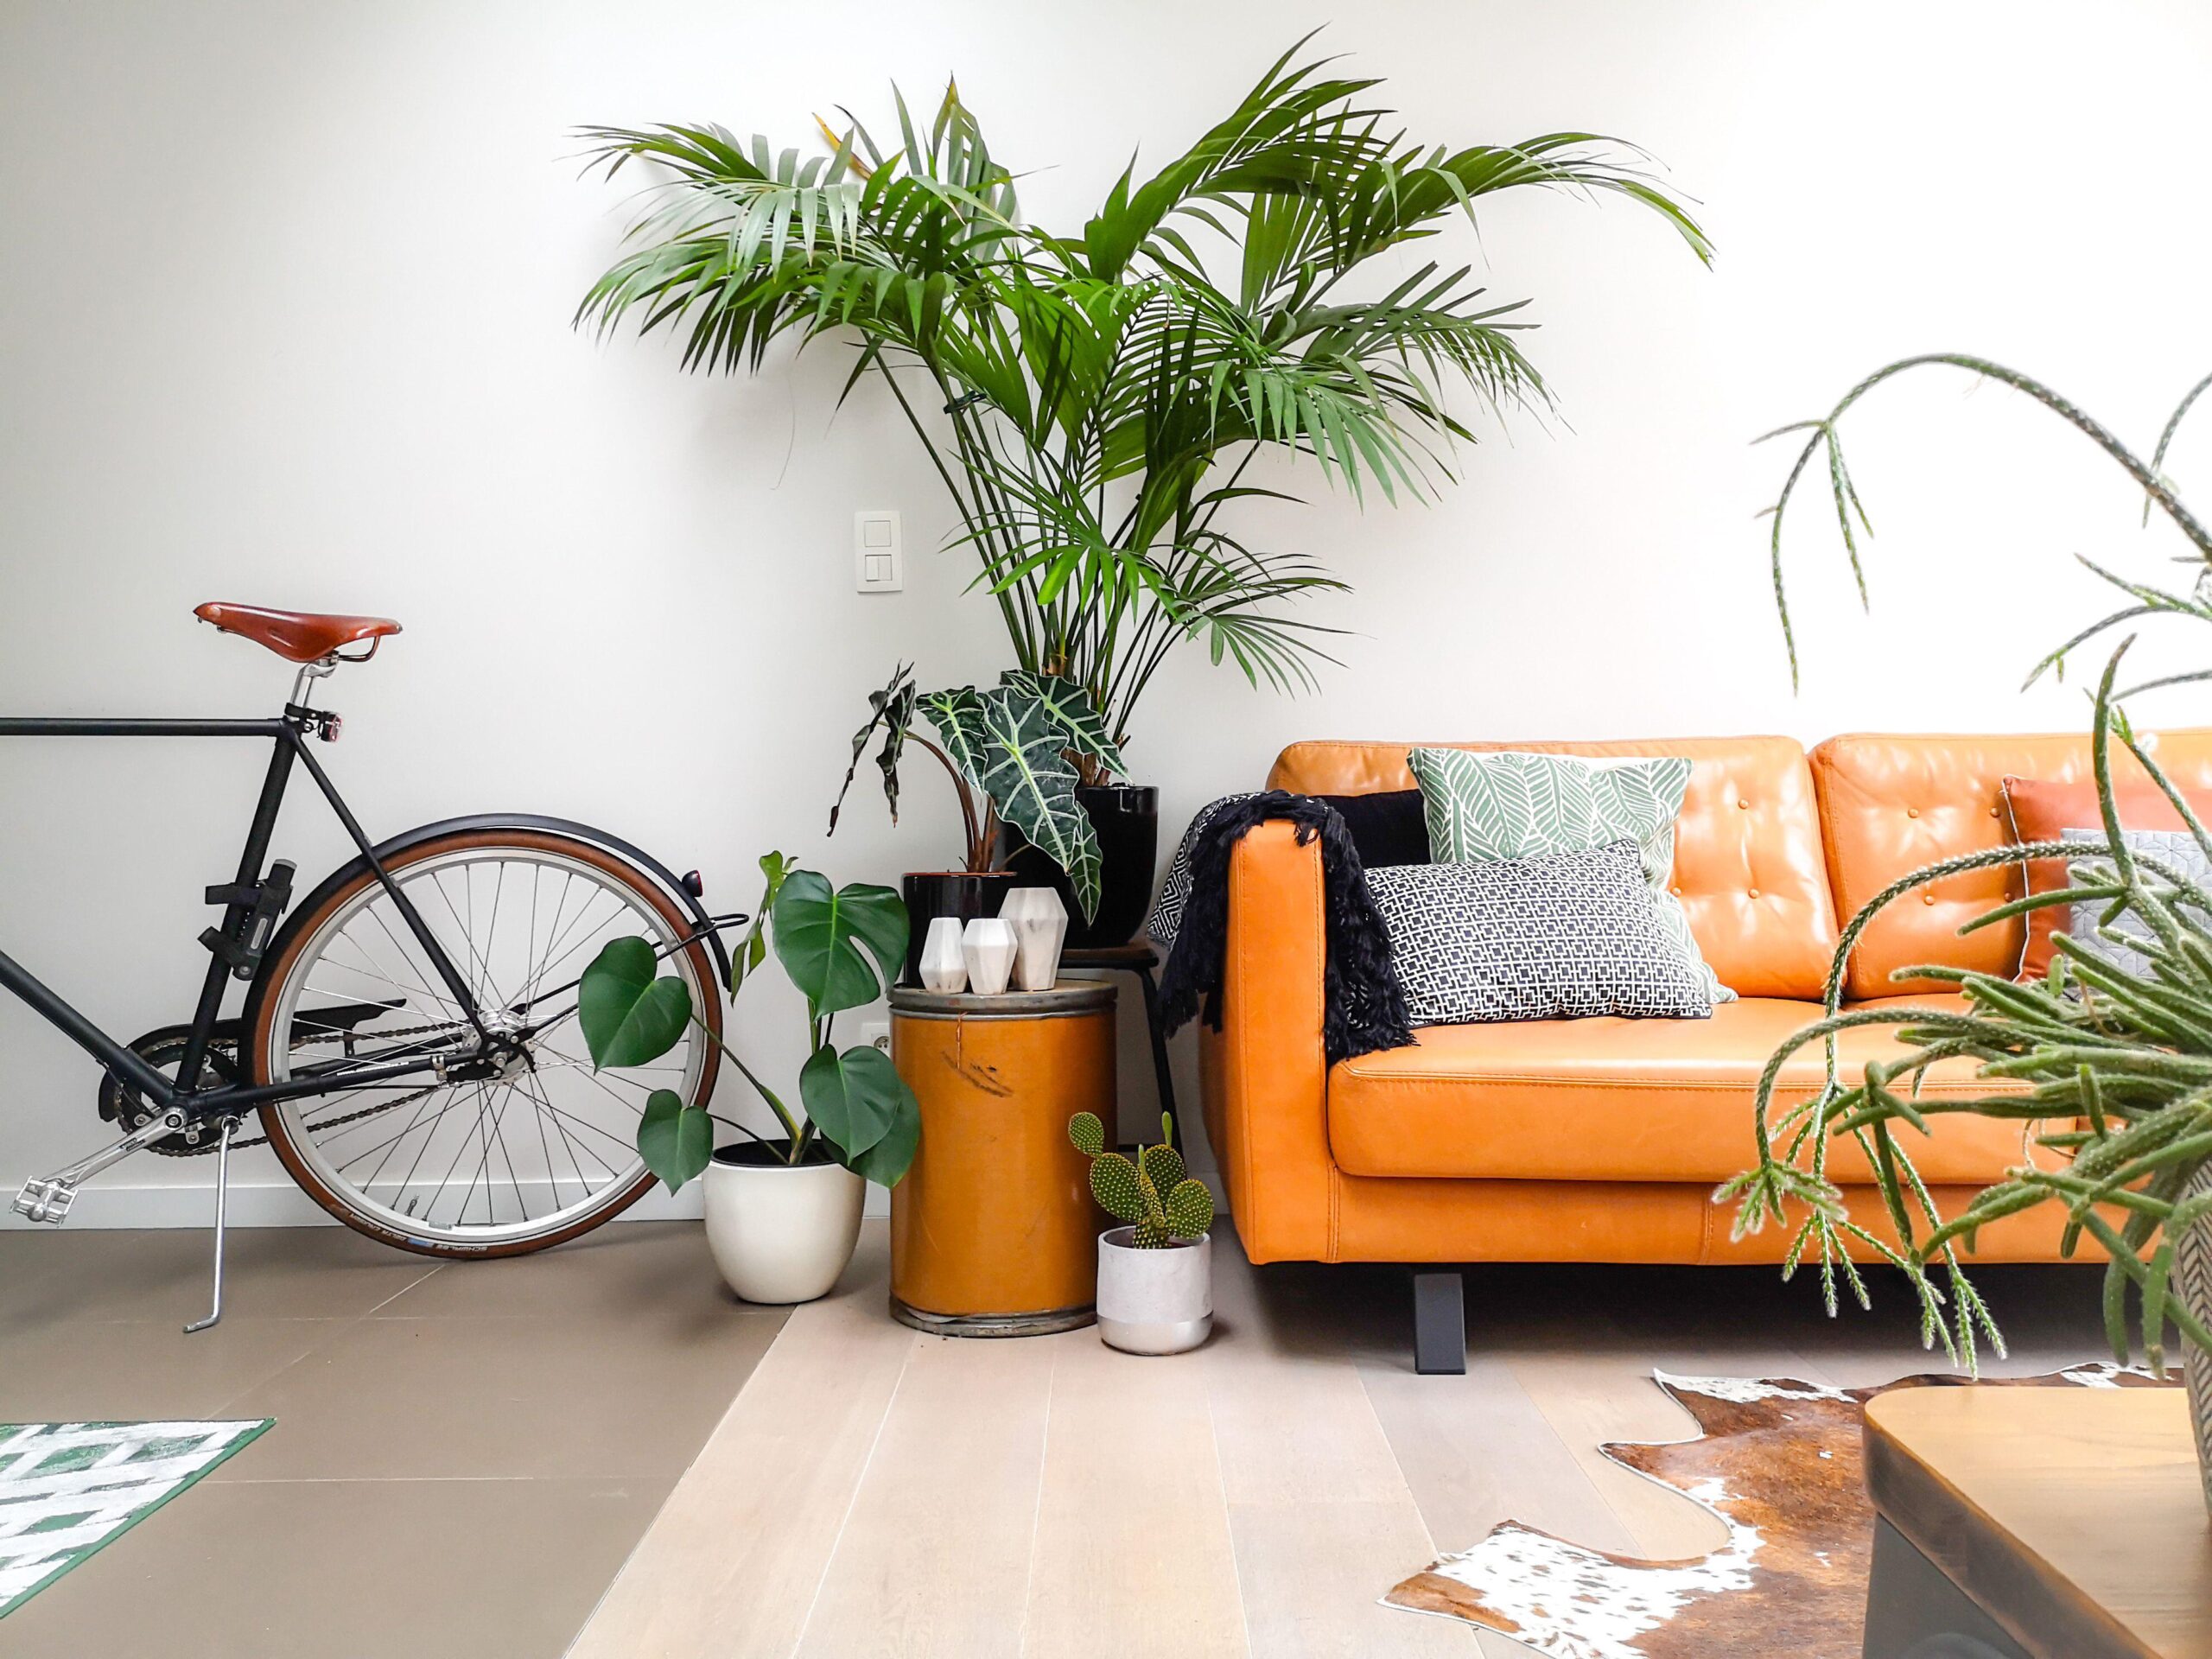 4 Great Indoor Plants for Interior Decoration